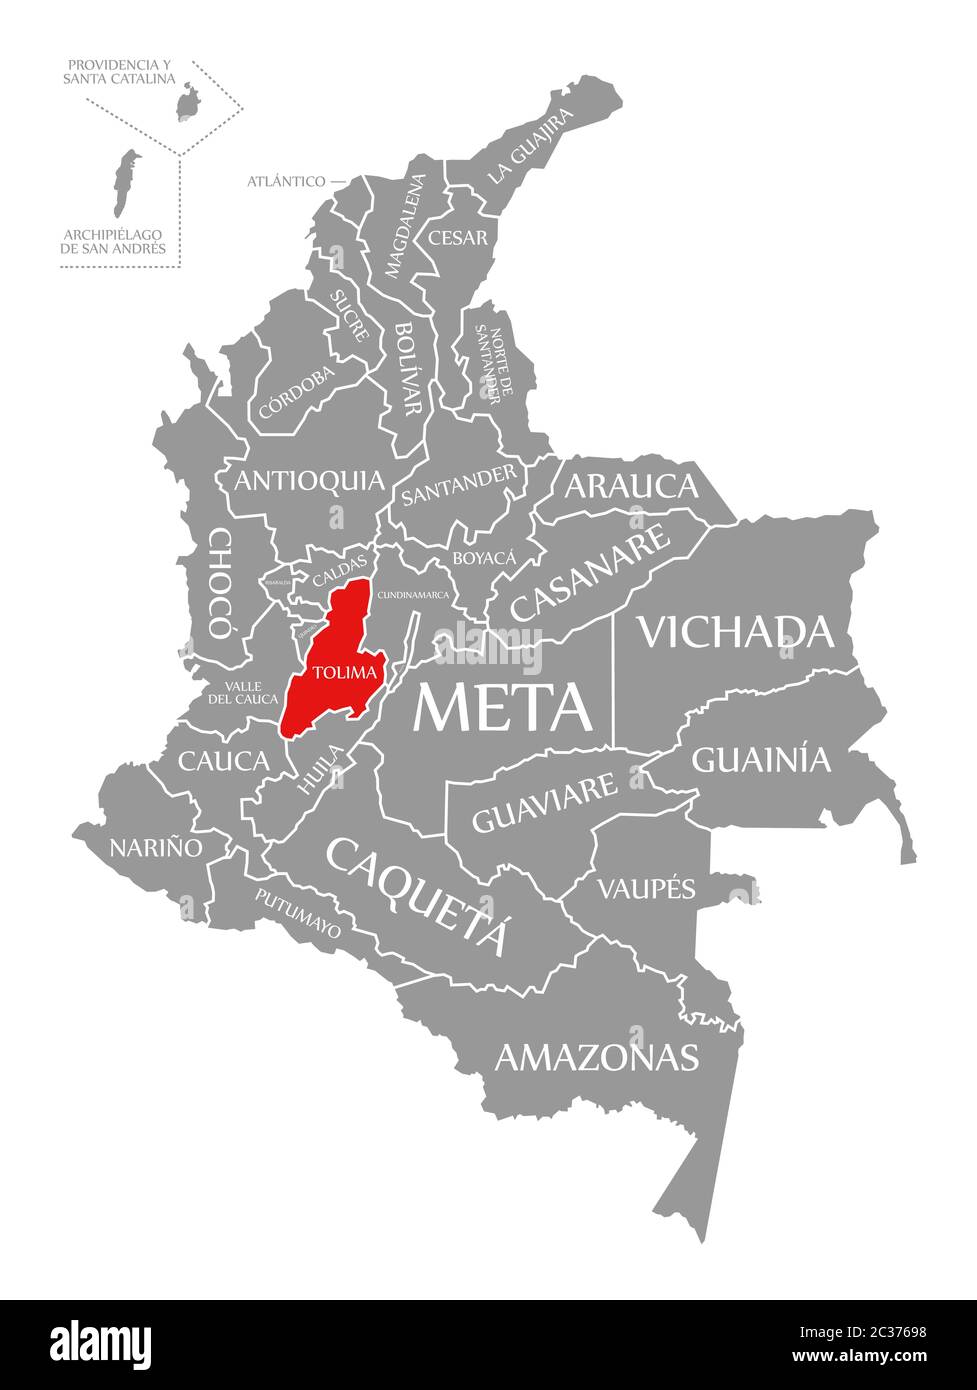 Tolima red highlighted in map of Colombia Stock Photo